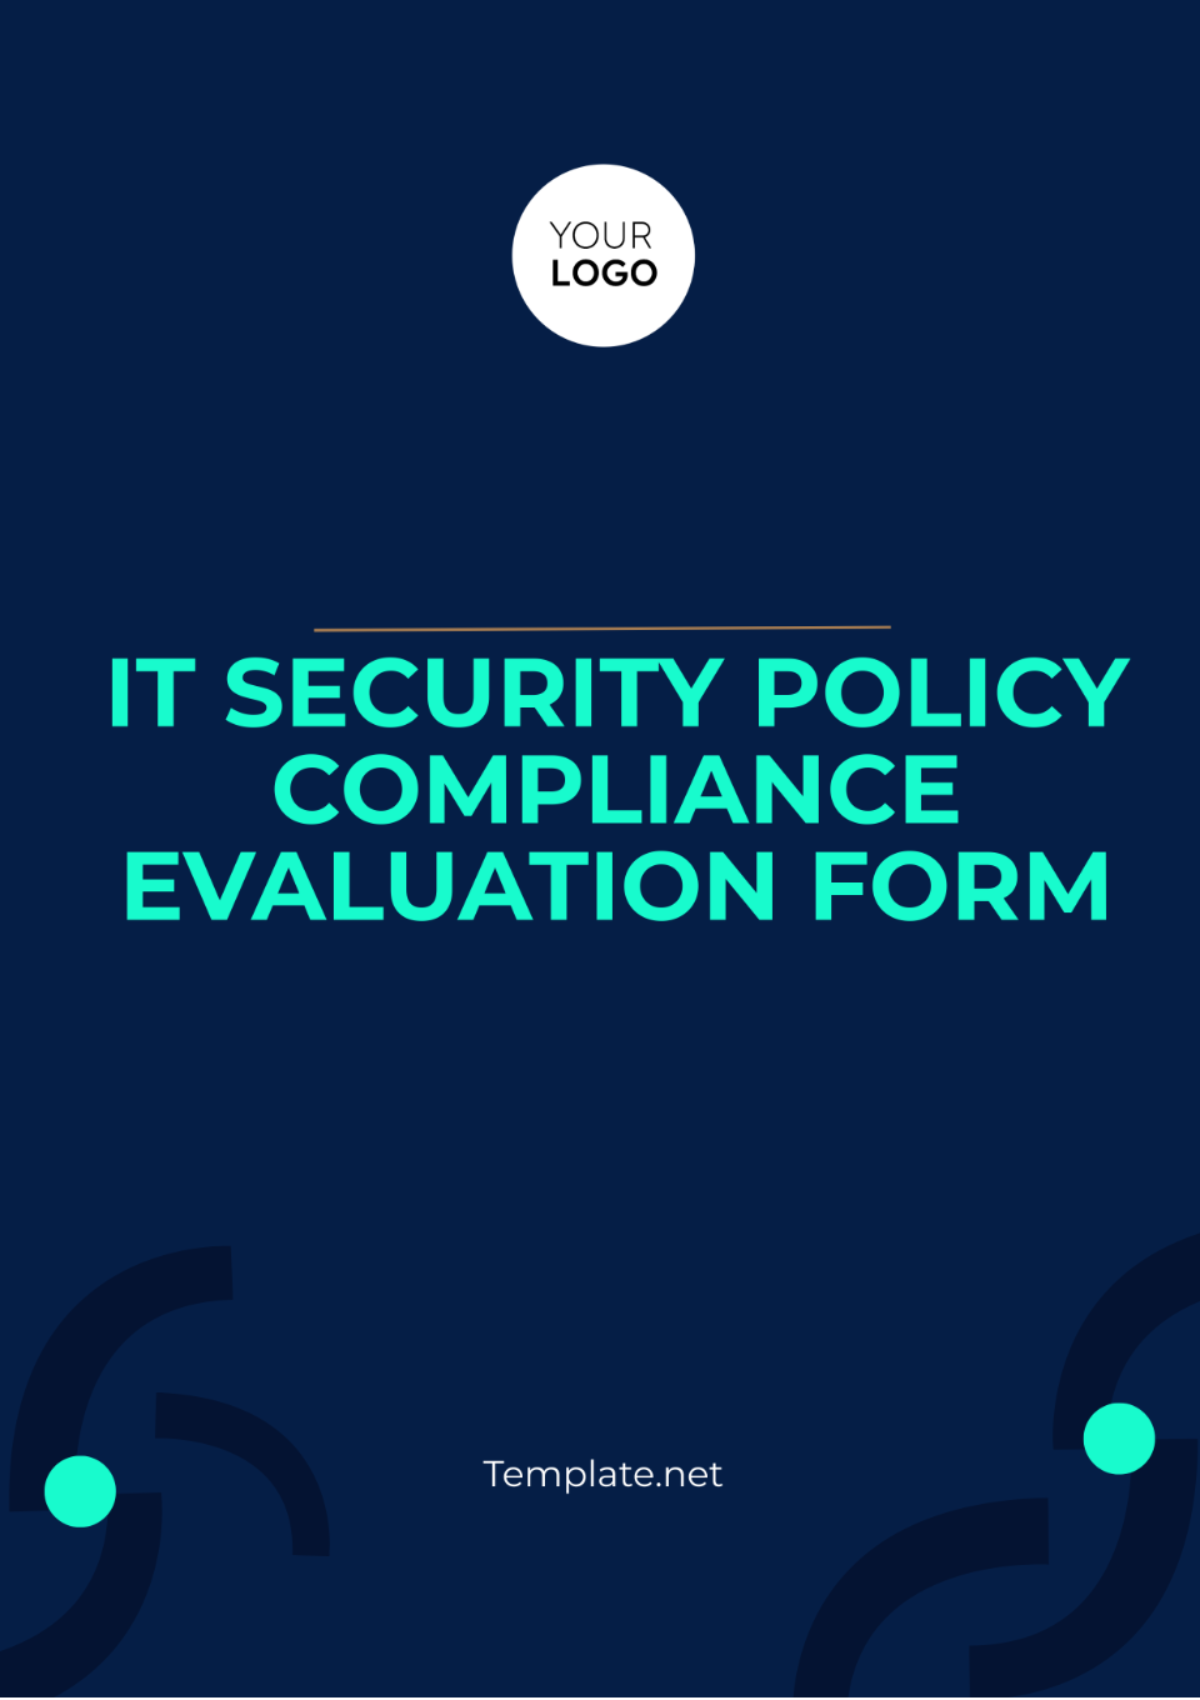 IT Security Policy Compliance Evaluation Form Template